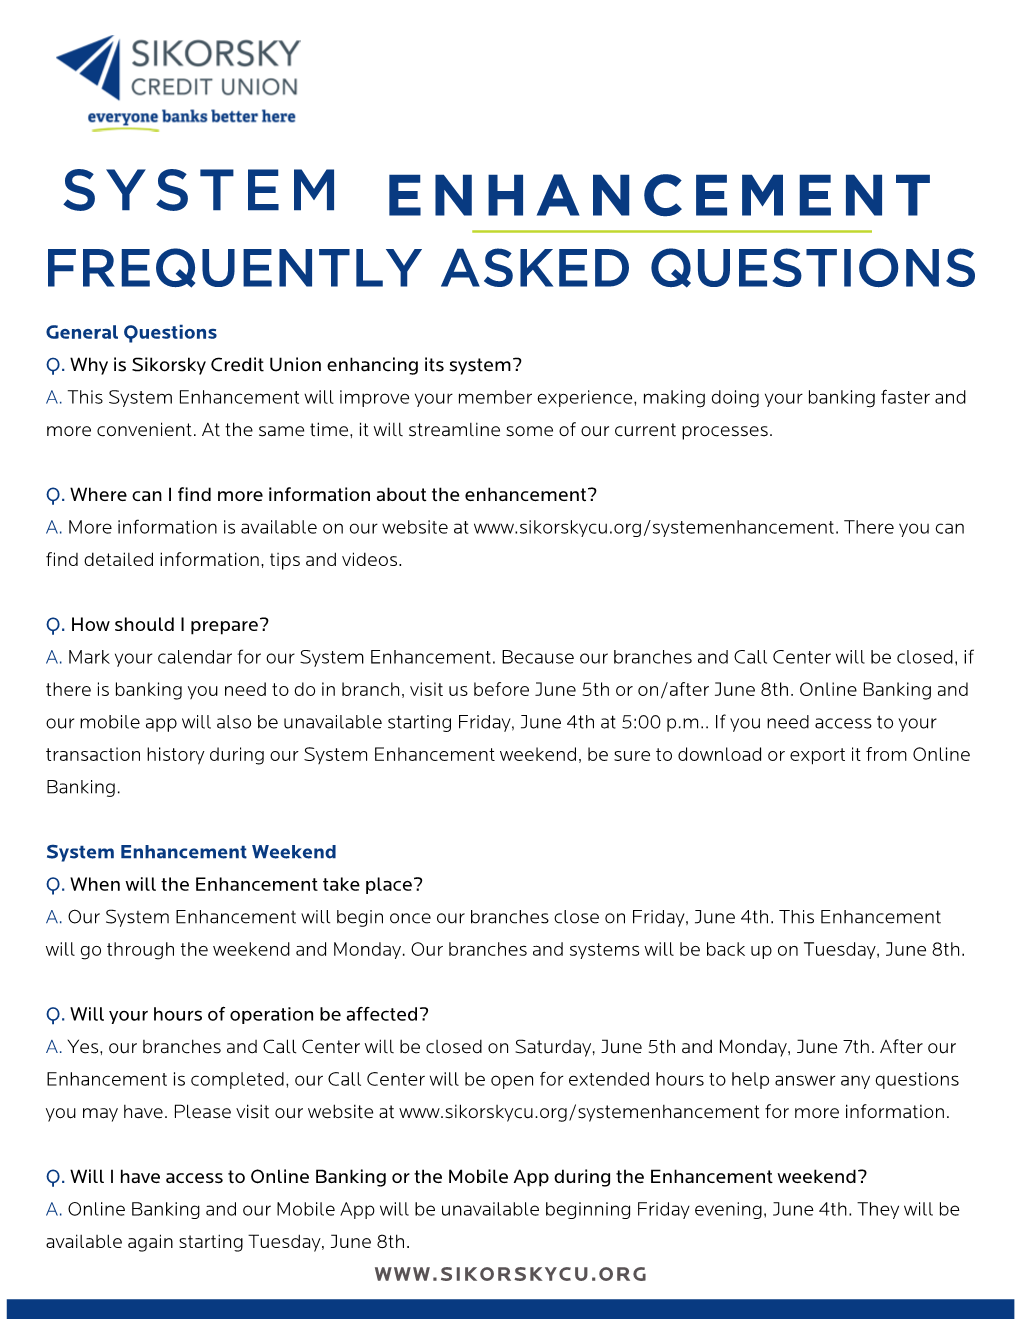 System Enhancement Frequently Asked Questions